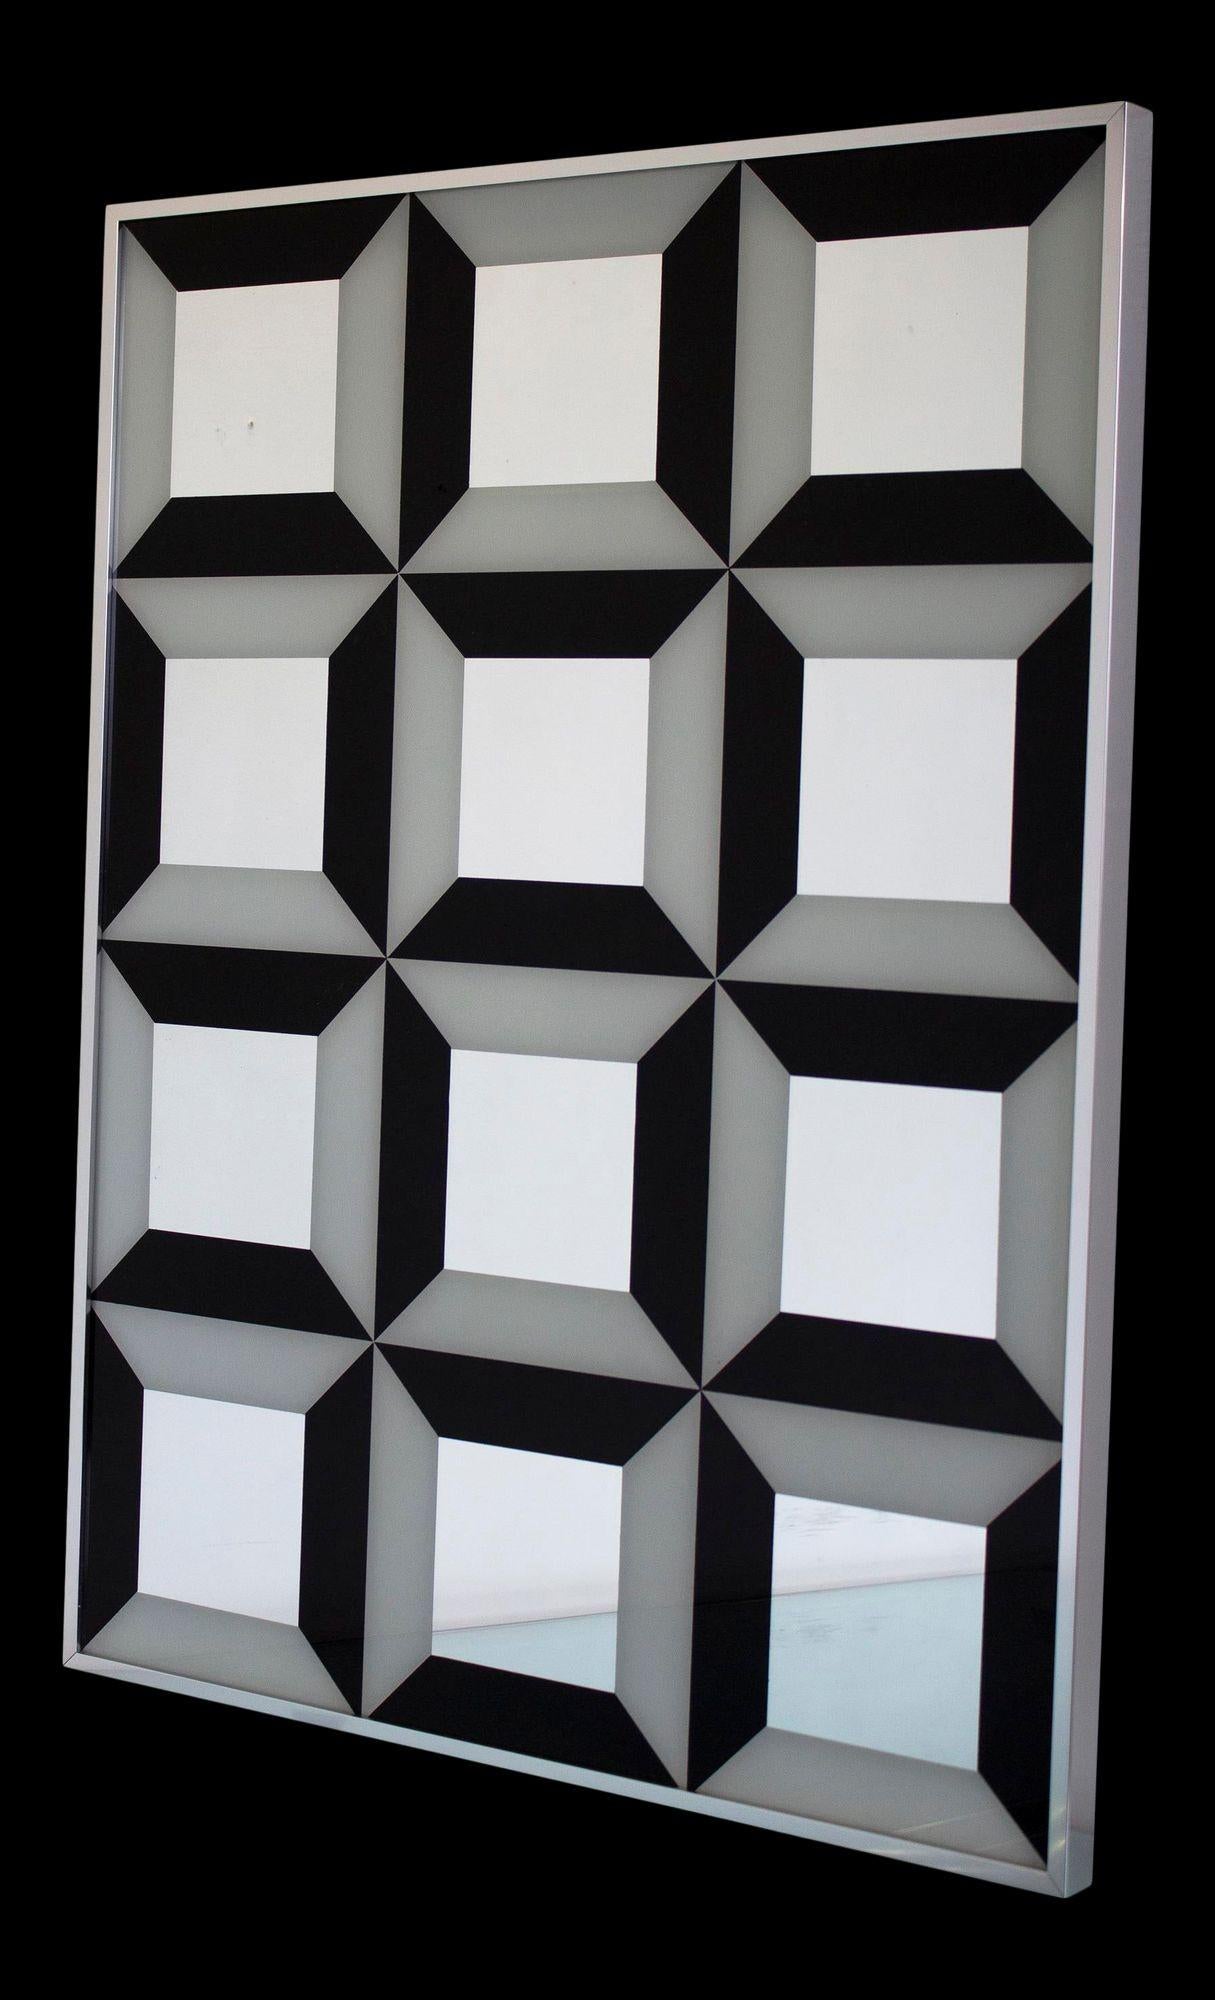 USA, 1970s
Op Art Mirror by Turner Mfg, after Verner Panton This is a vertical configuration of three squares by four with a black and white op art border around each center mirrored panel. Statement-making piece. Matching smaller 3 panel mirror